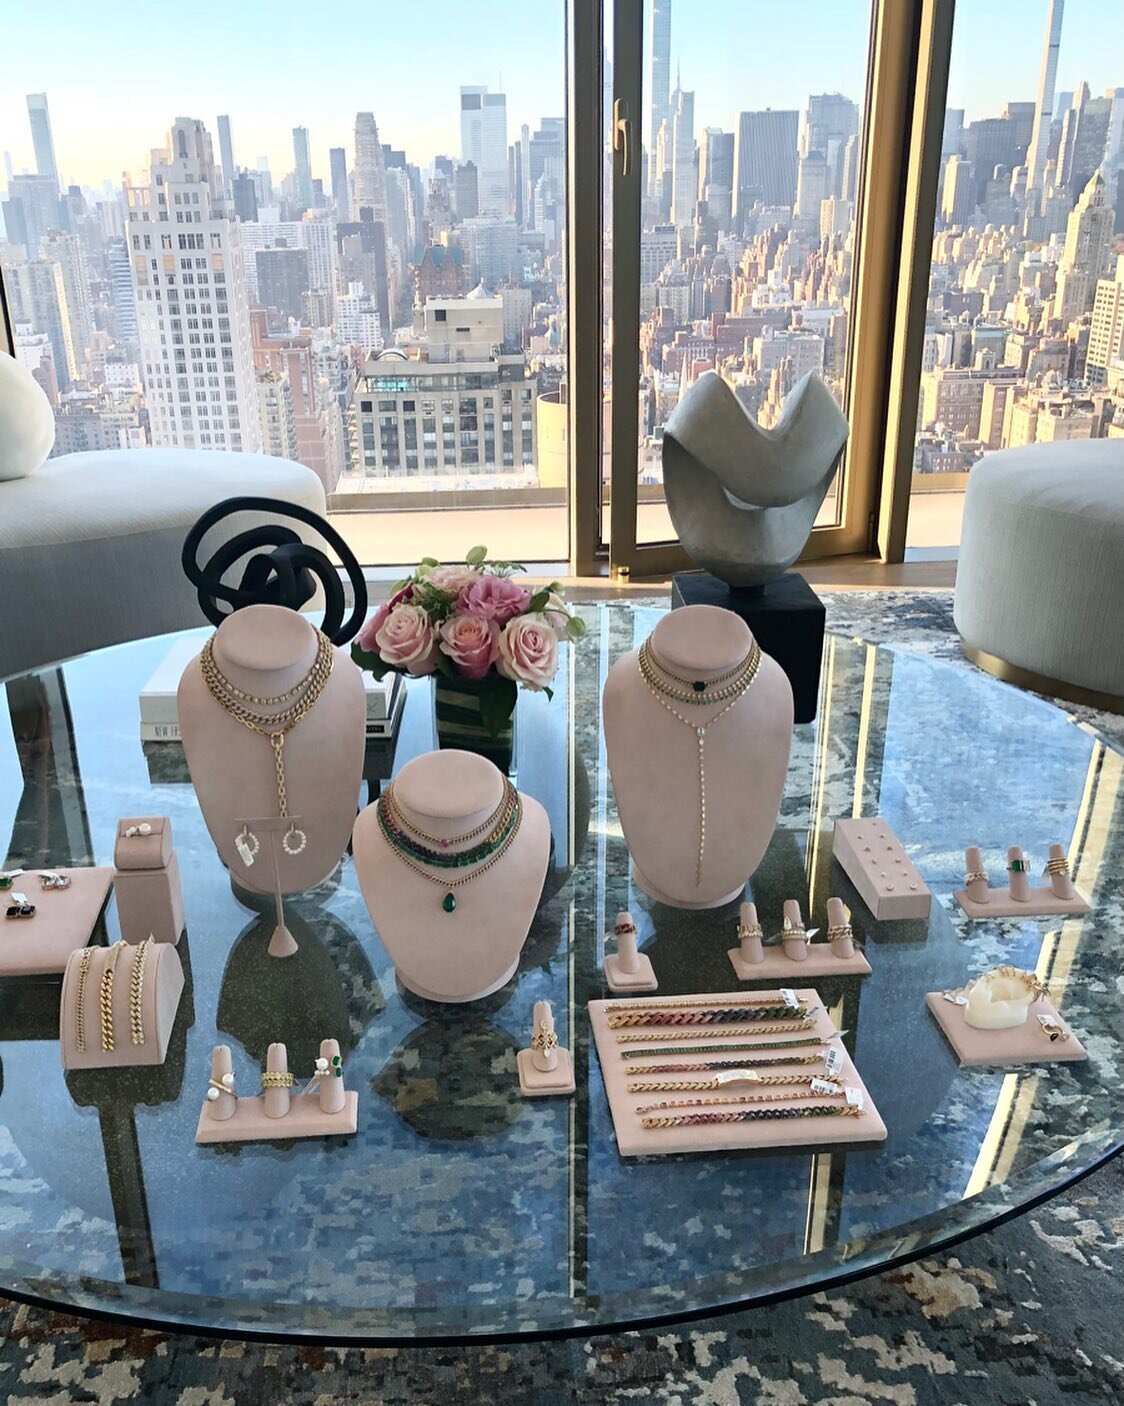 @shayjewelry &amp; our custom displays with a view 😍 

#nyc #jewelrydisplay #displays #jewelry #jewelrydisplays #diamonddistrict #smallbusiness #supportsmallbusinesses #jewelrybox #vintage #shoplocal #womanownedbusiness